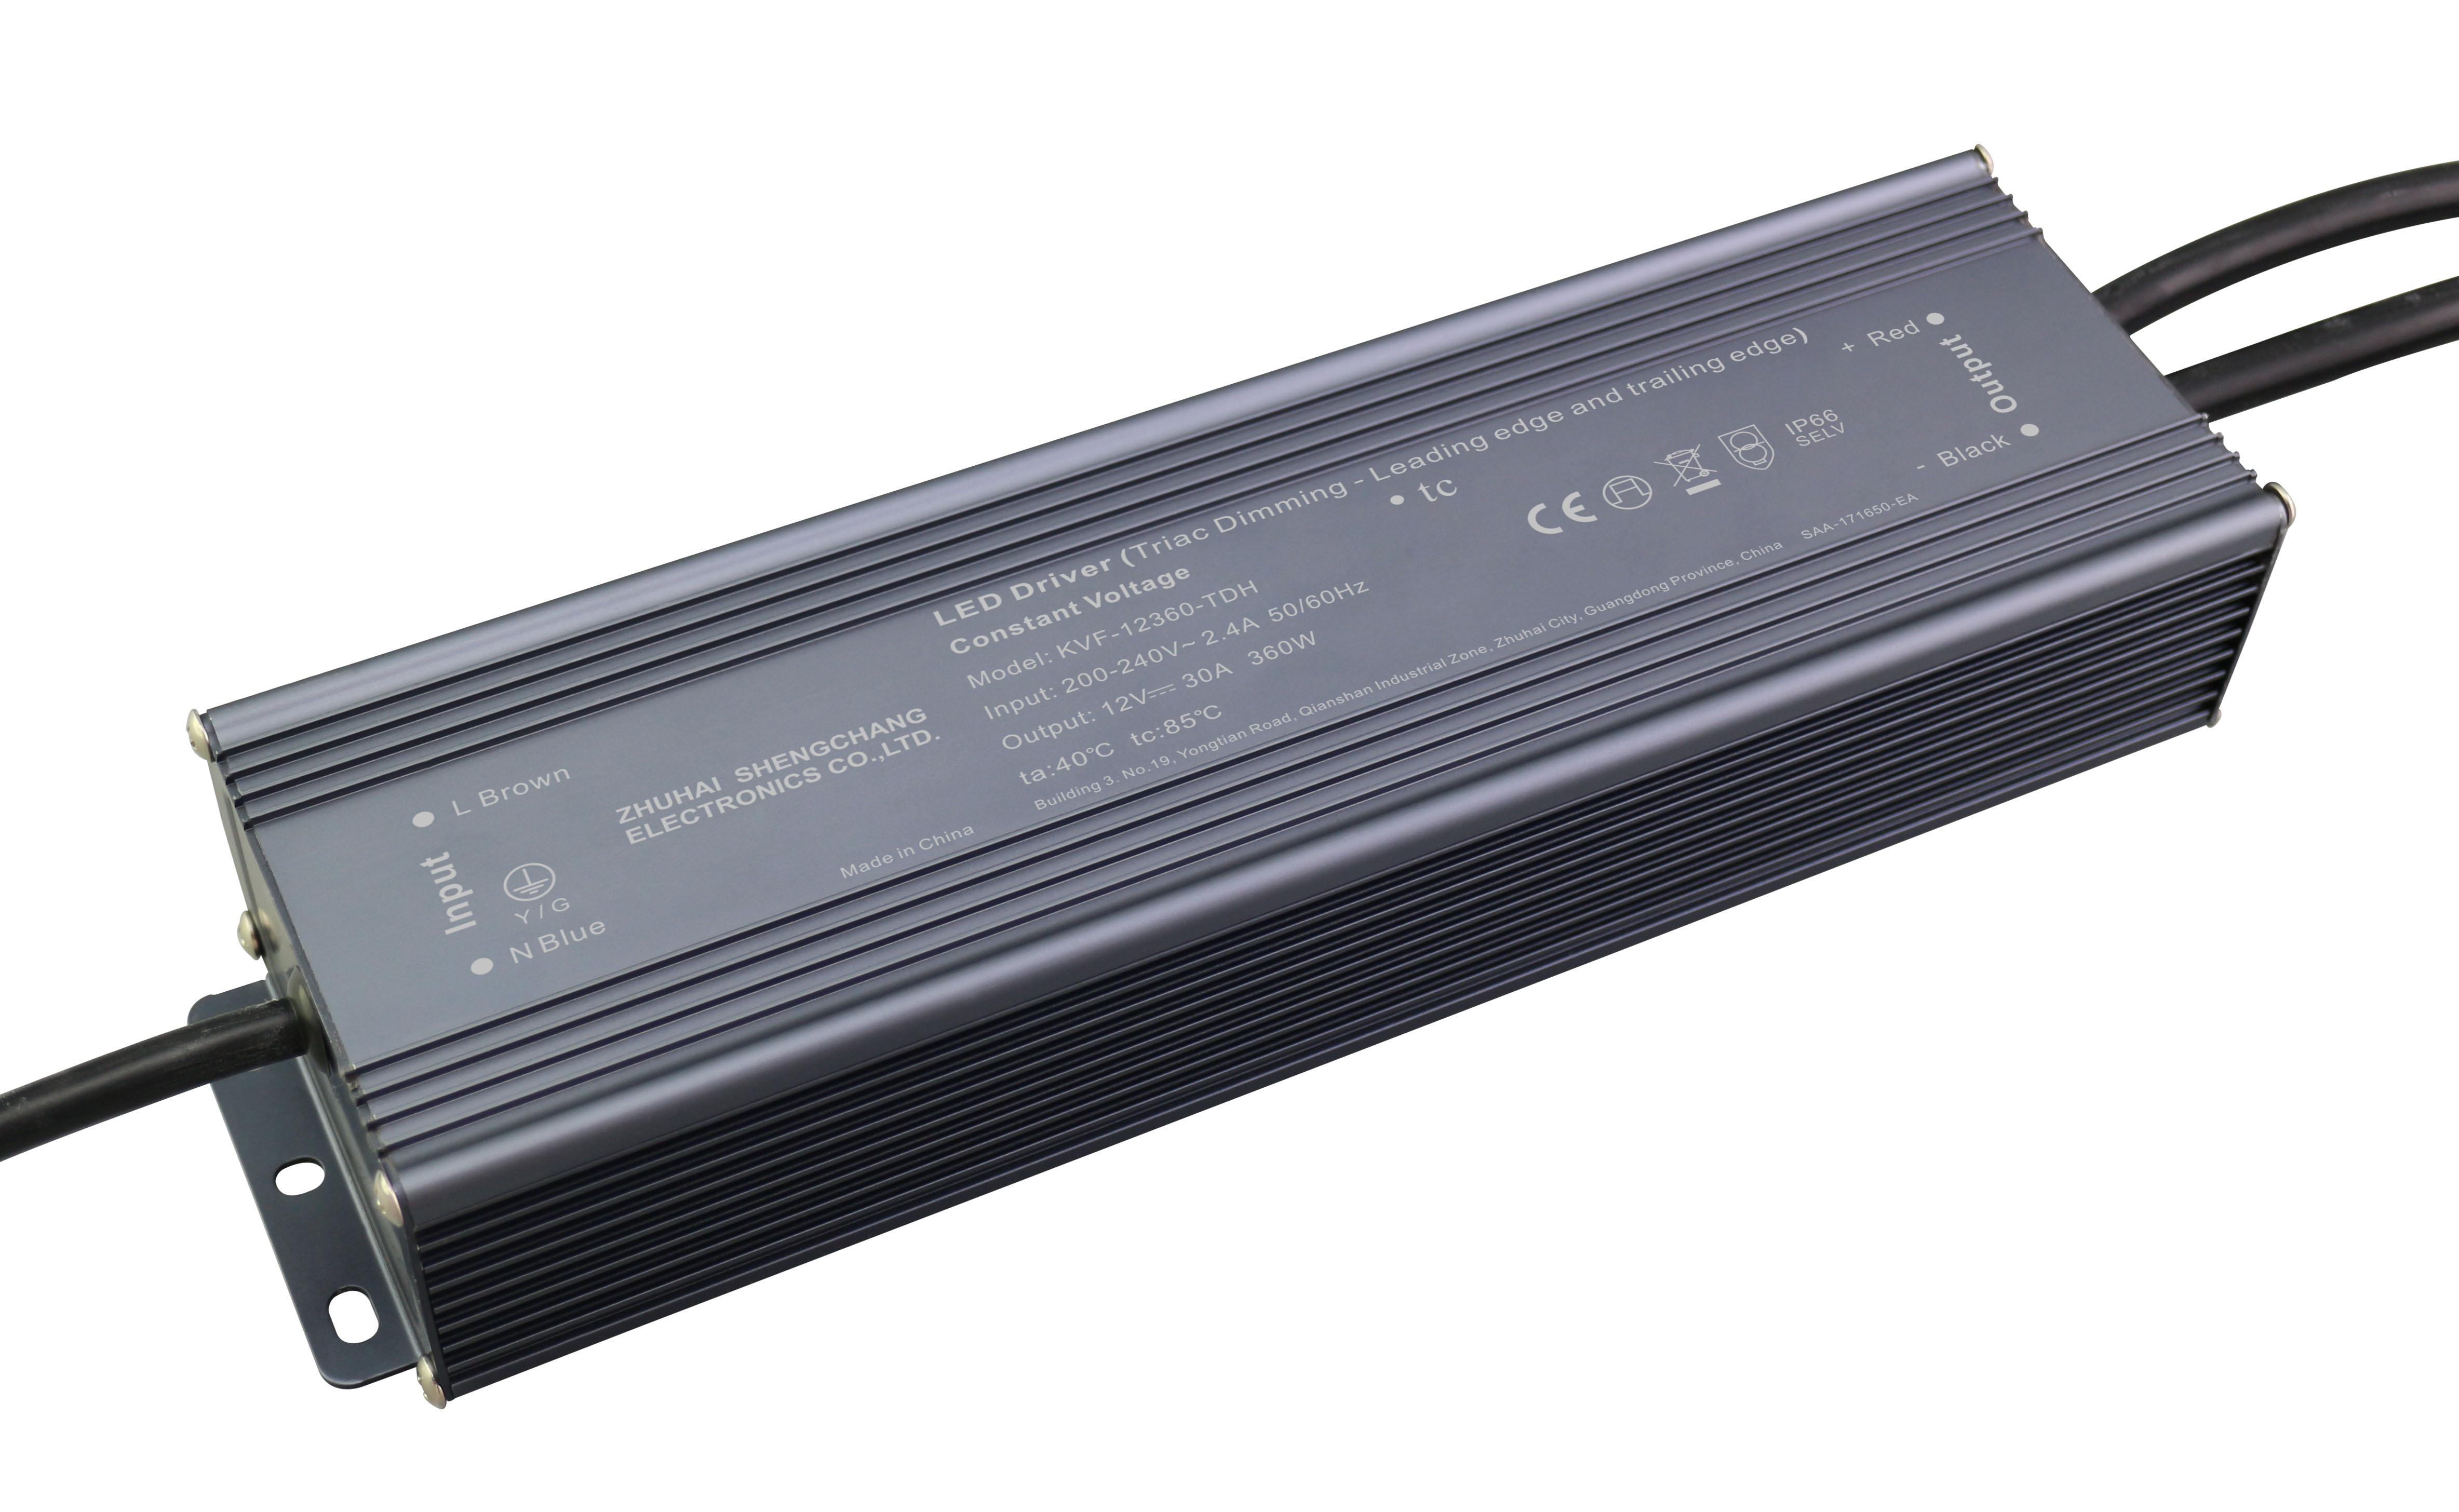 KVF-TDH series 360W Constant Voltage Triac Dimmable LED Driver